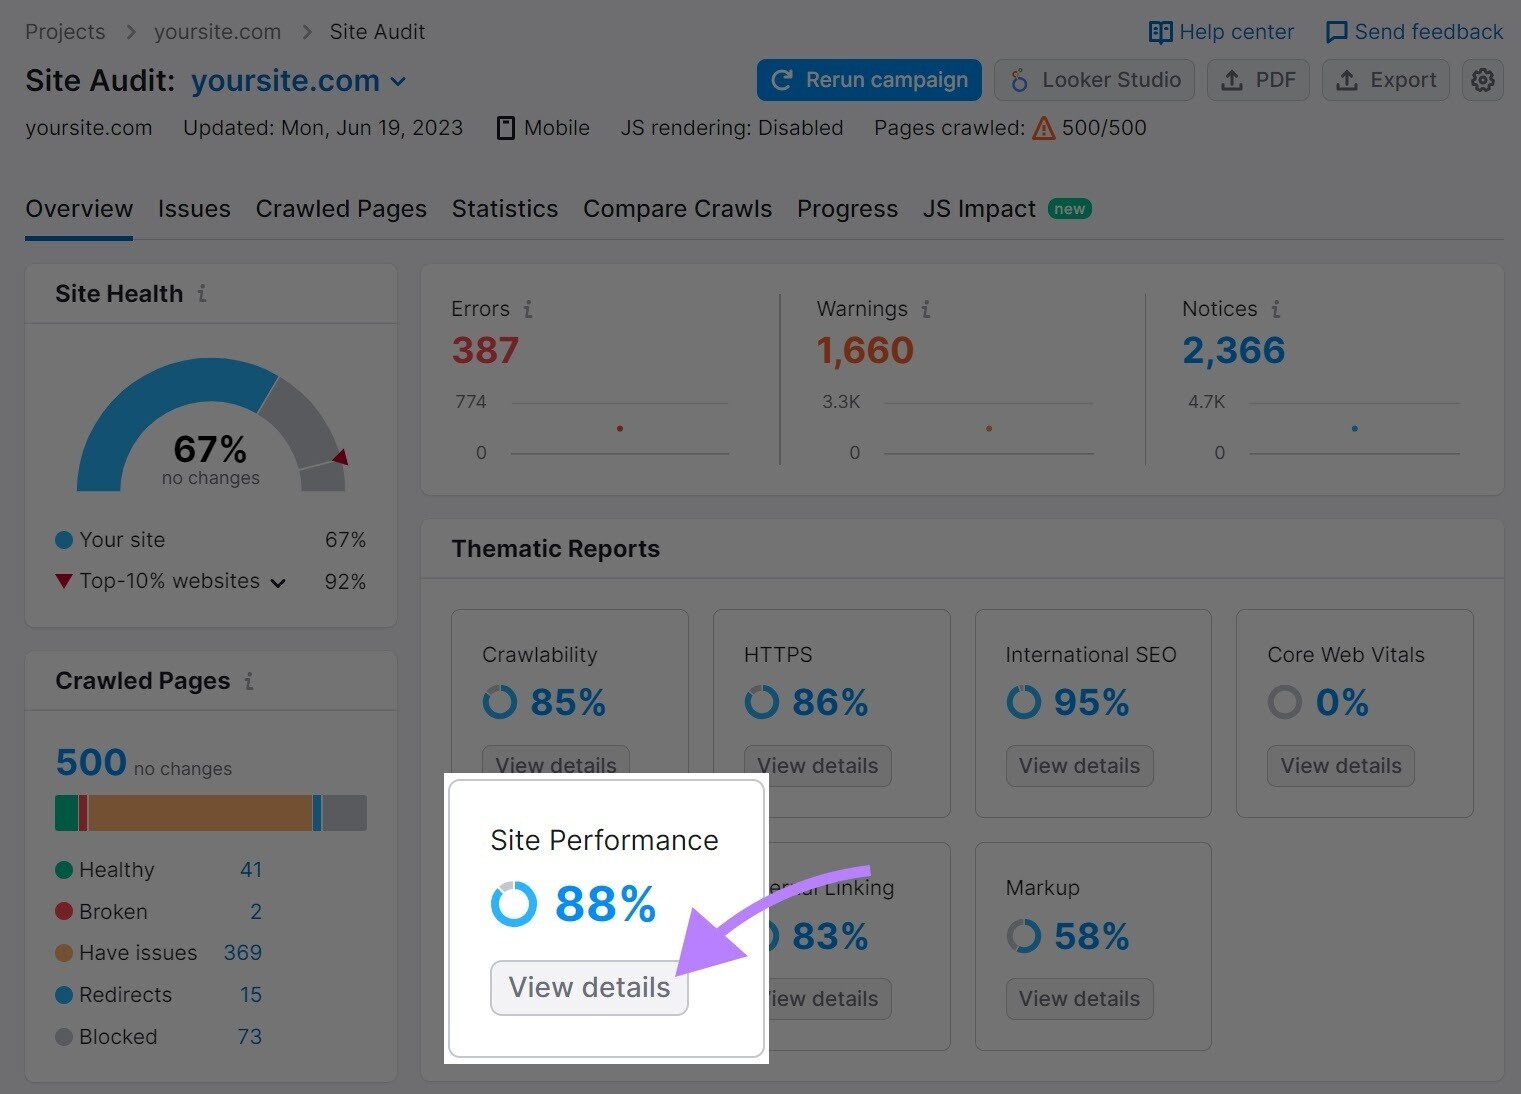 “Site Performance” section highlighted on the Site Audit dashboard.